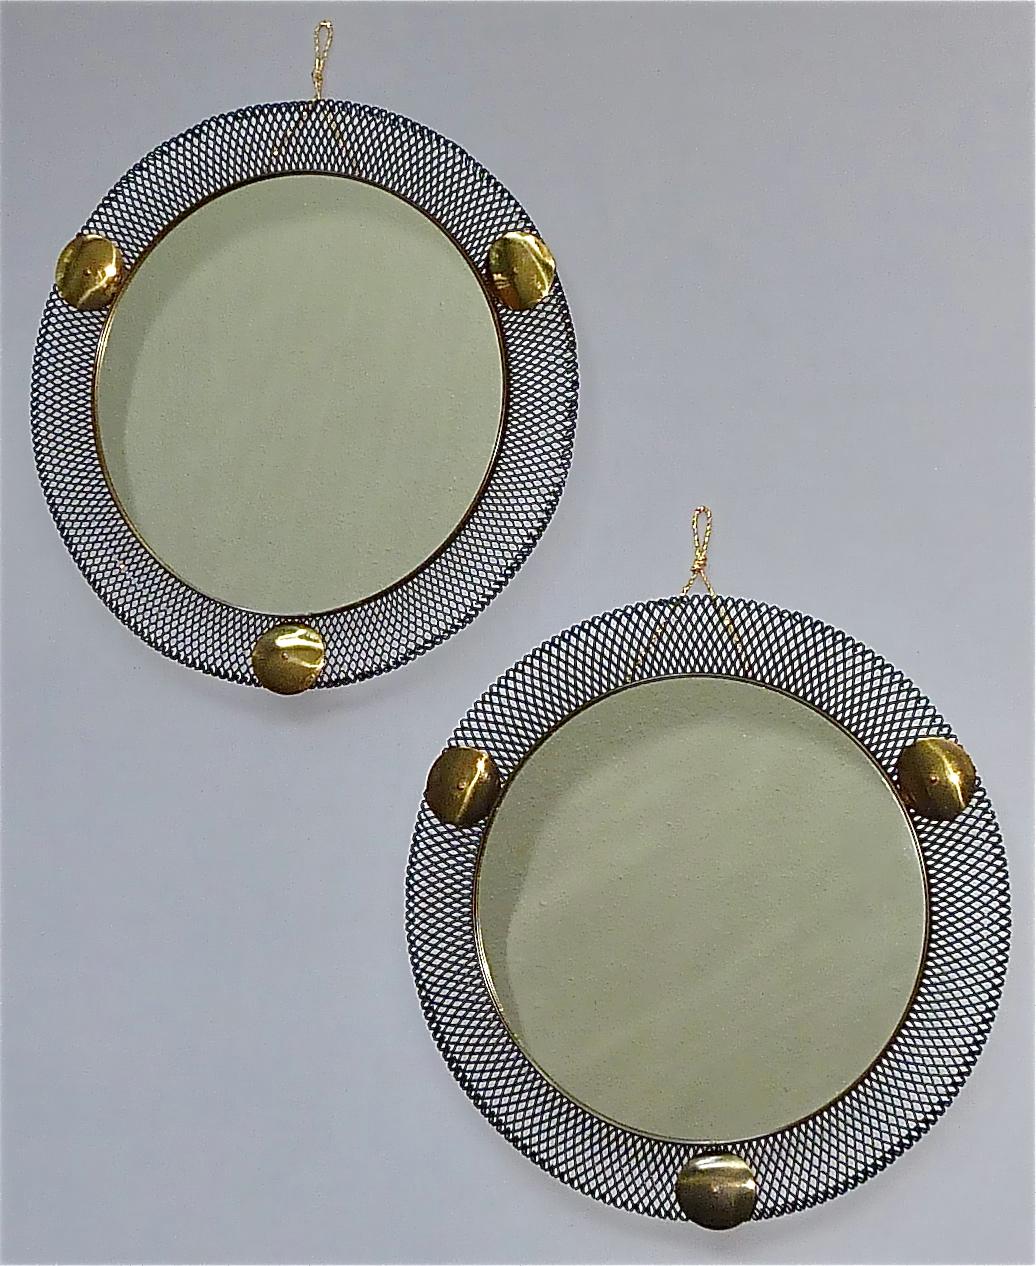 Pair Round Midcentury Wall Mirrors Brass Black Stretched Metal 1955 Mategot Biny For Sale 6